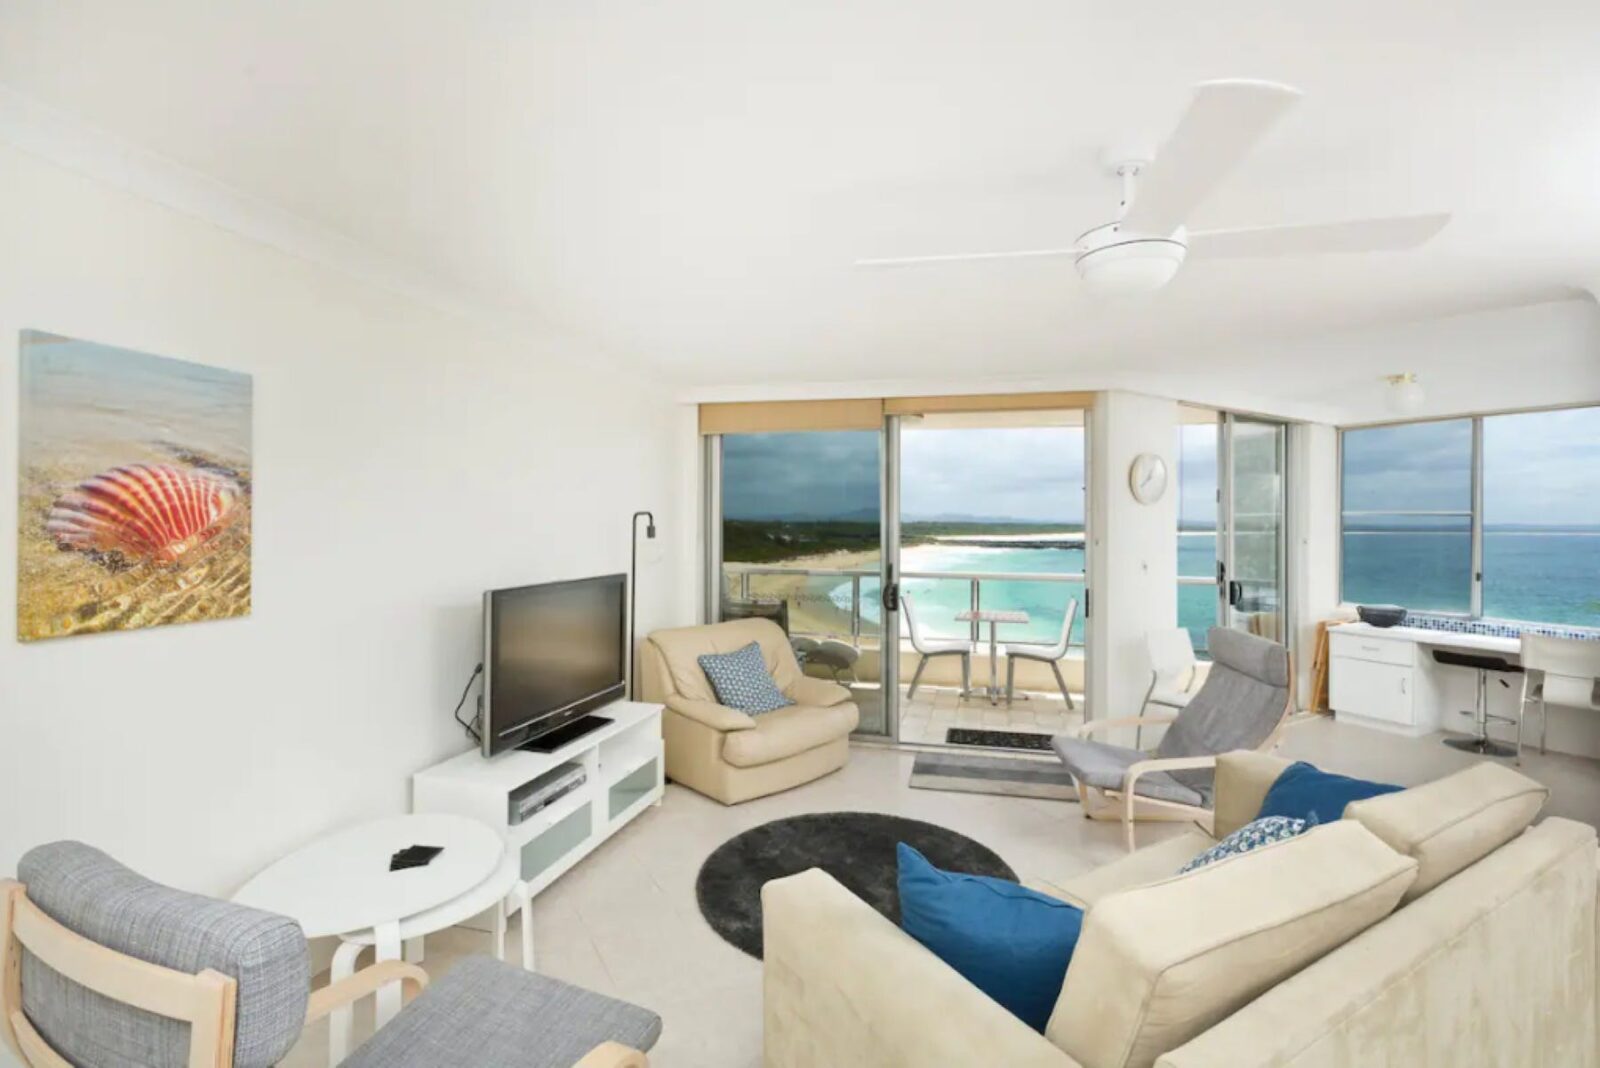 Living room with lounges, ceiling fan, TV, ocean views, leading out to balcony with 2 seater setting